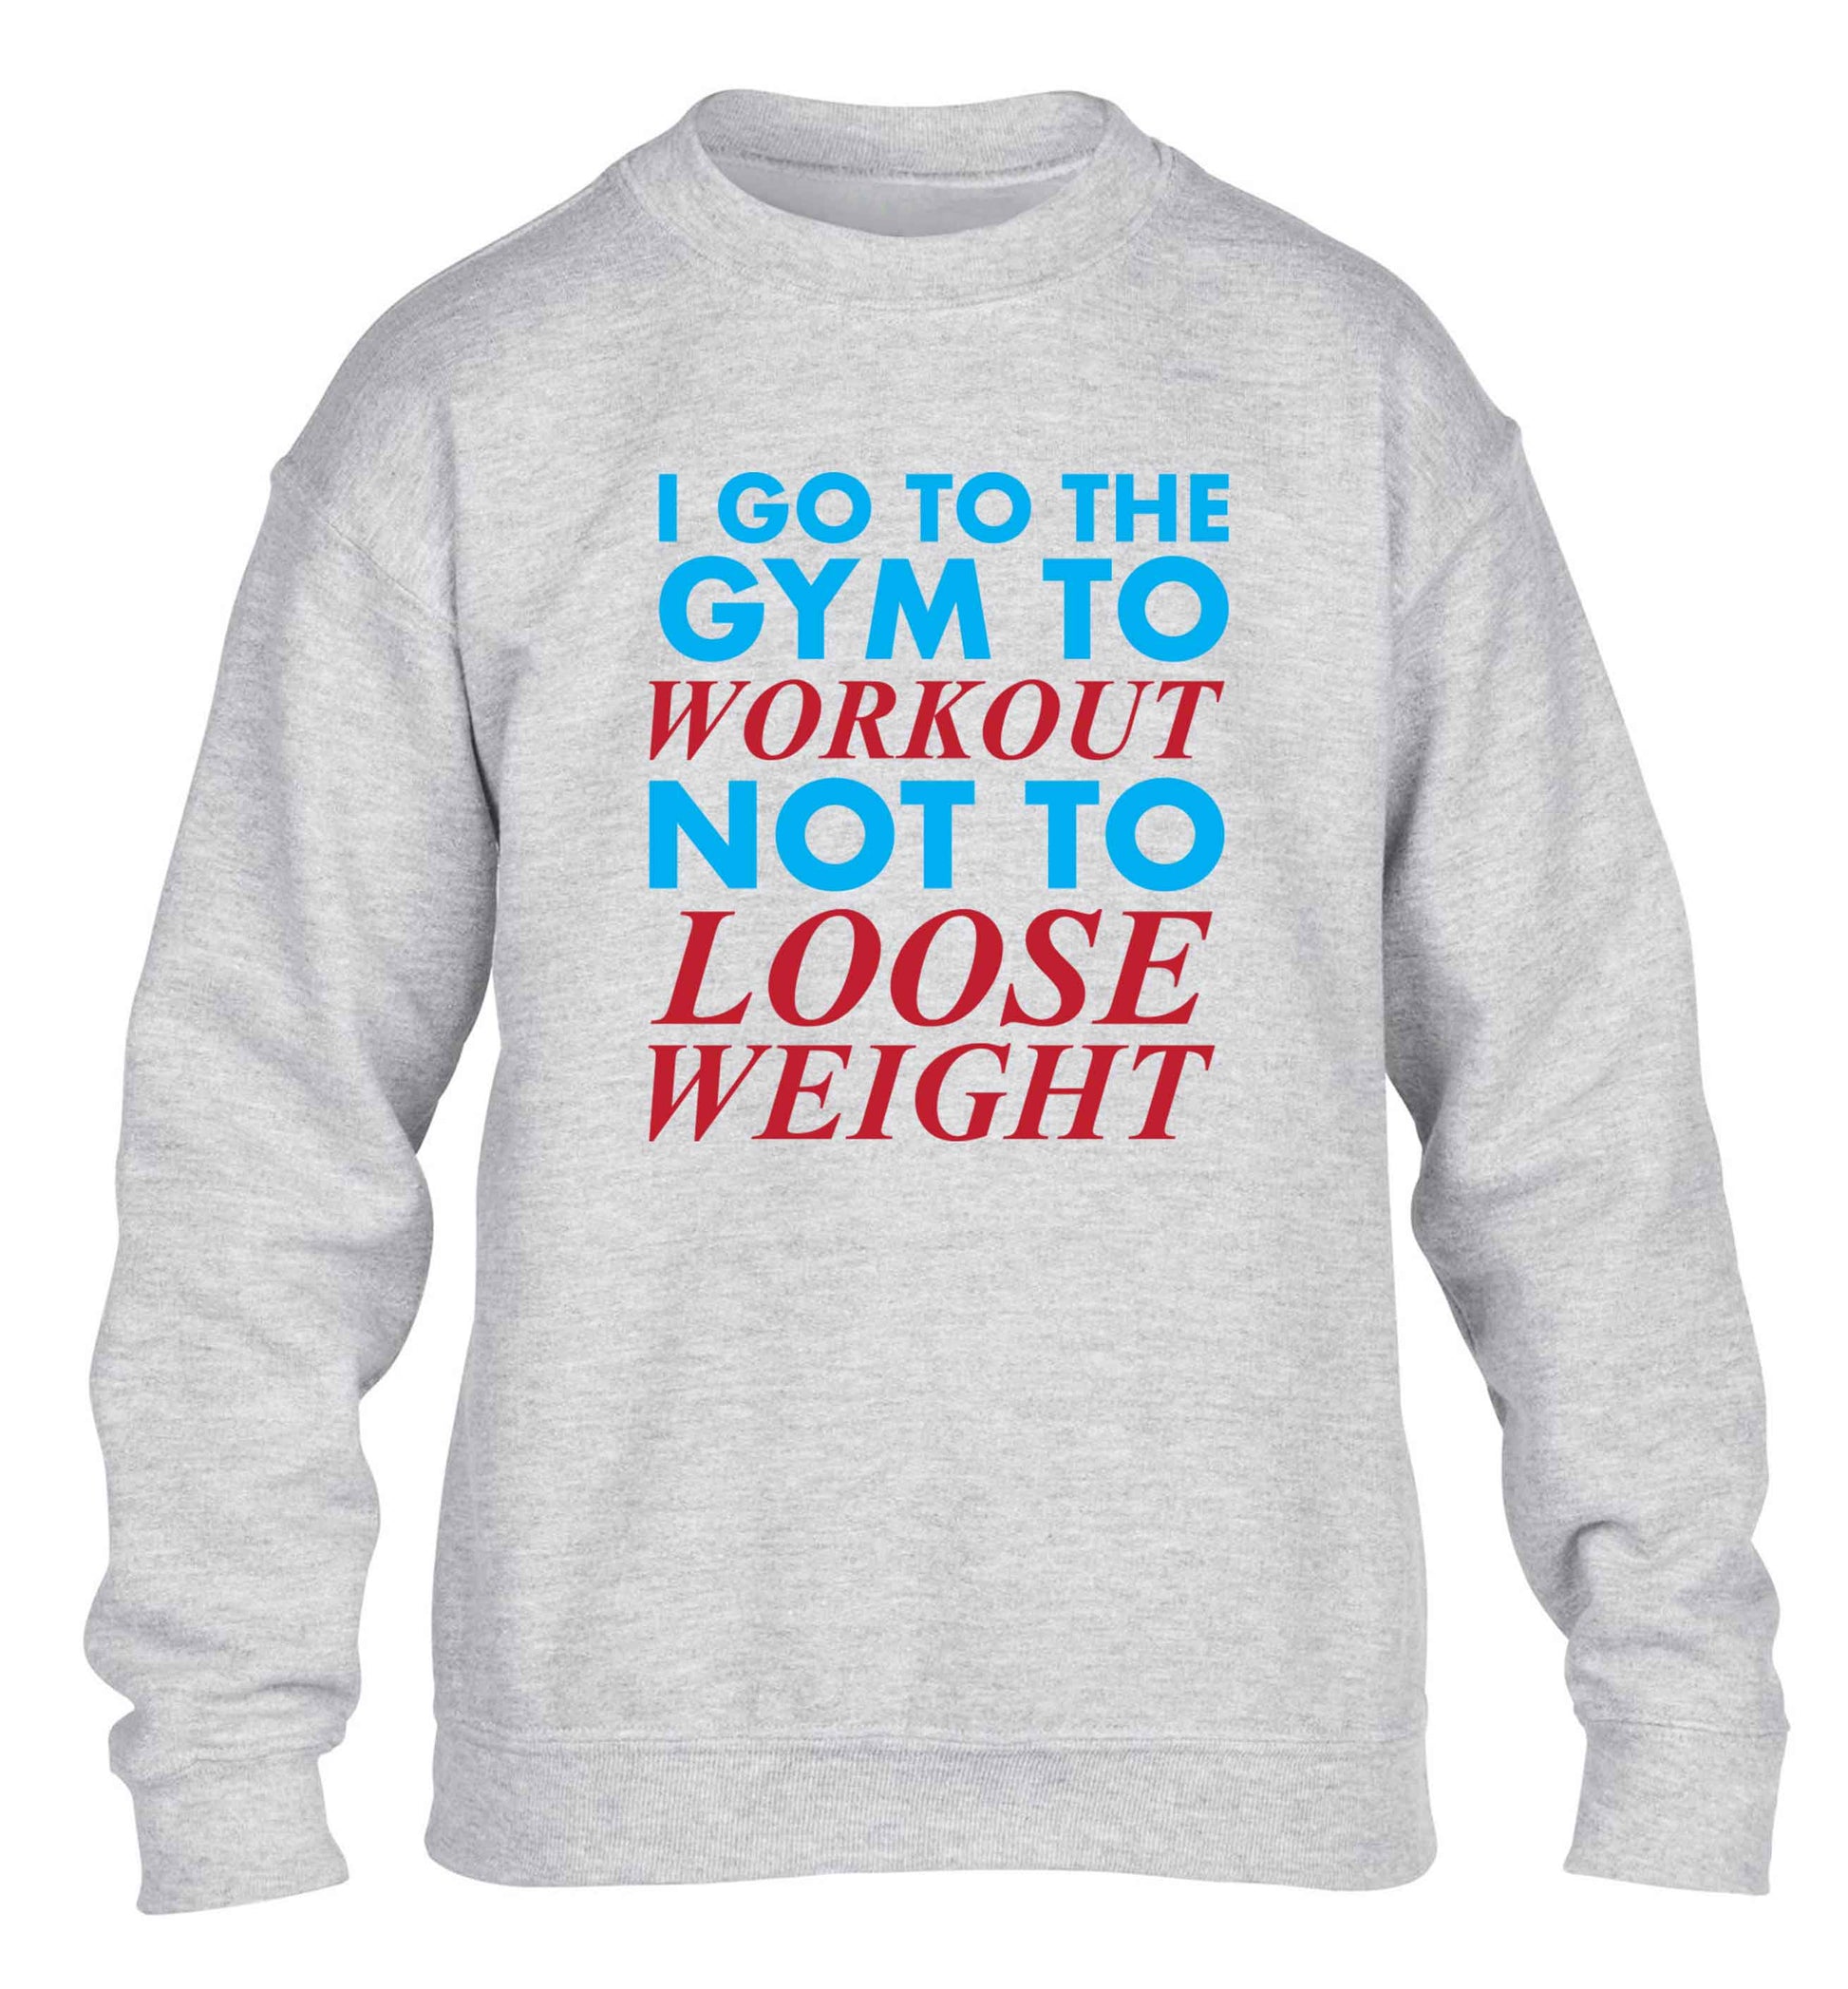 I go to the gym to workout not to loose weight children's grey sweater 12-13 Years